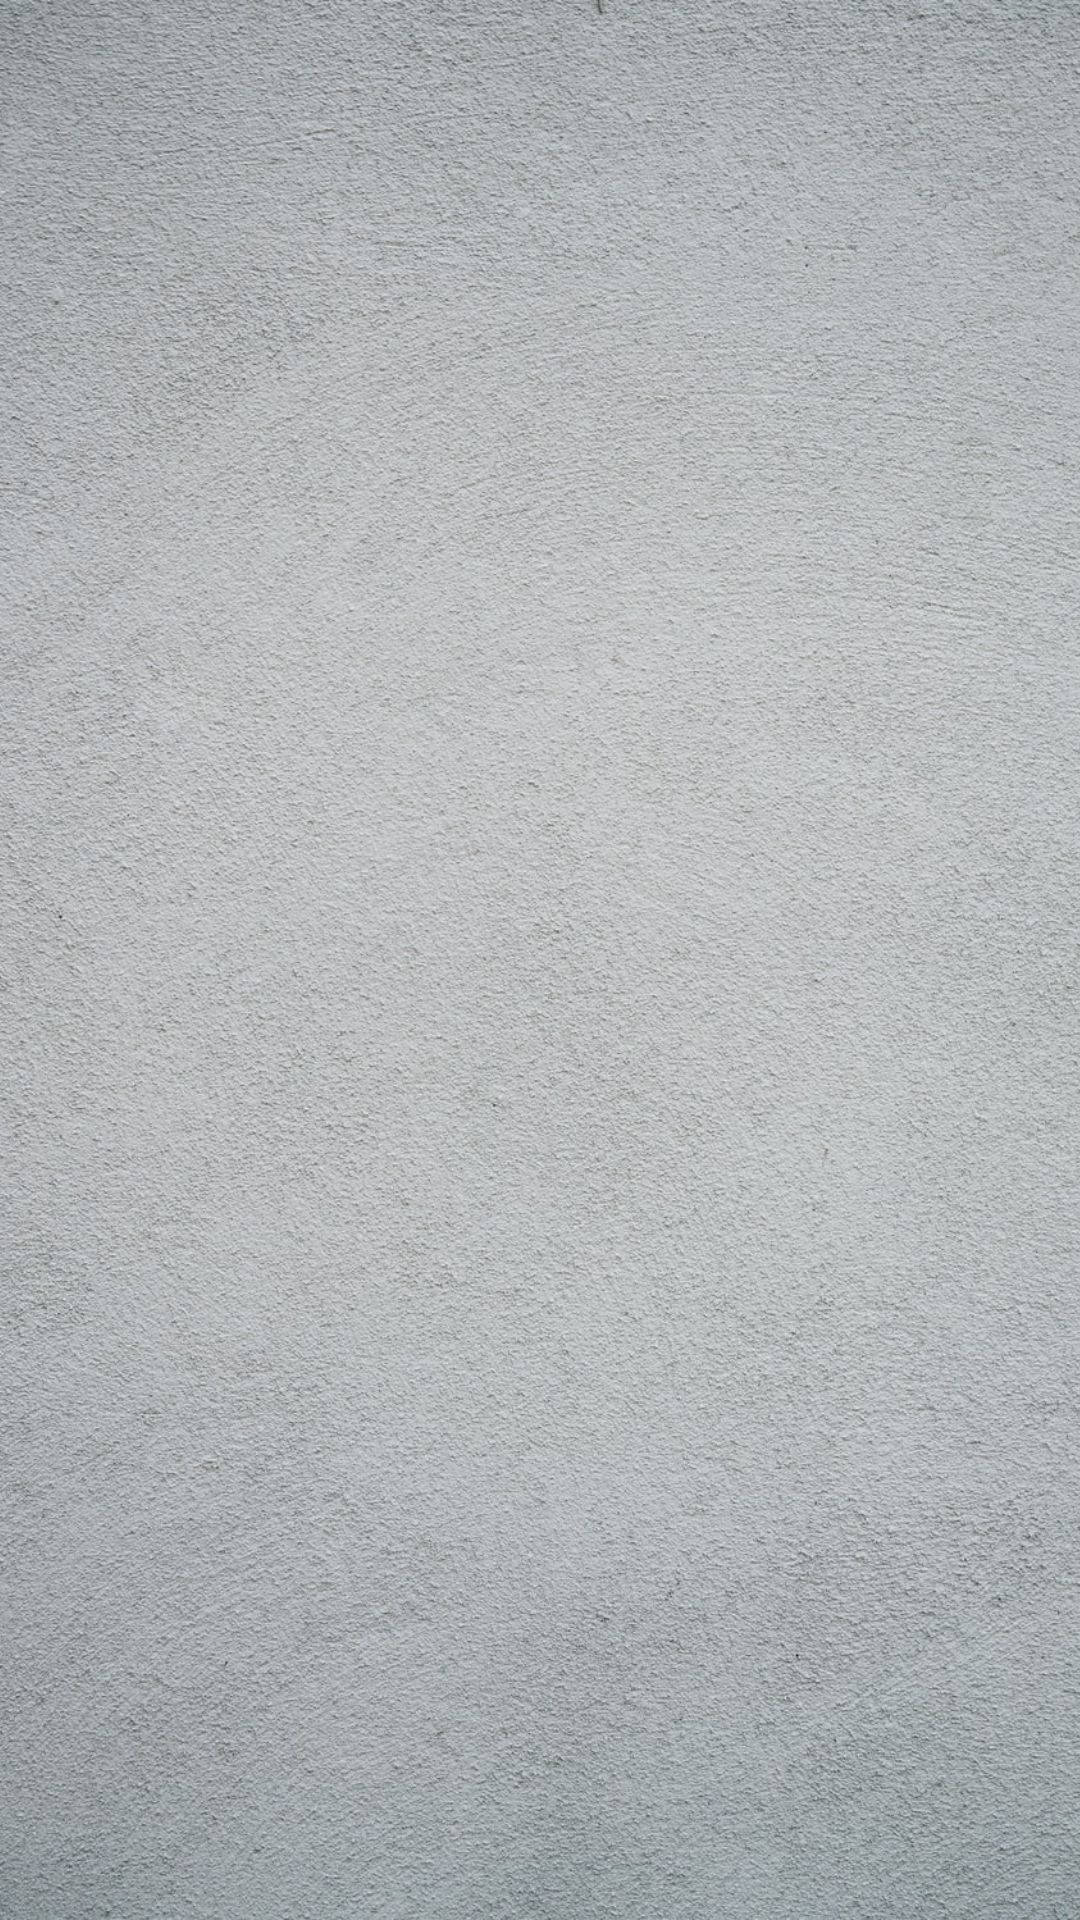 Solid Grey Wall With Subtle Speckles Wallpaper